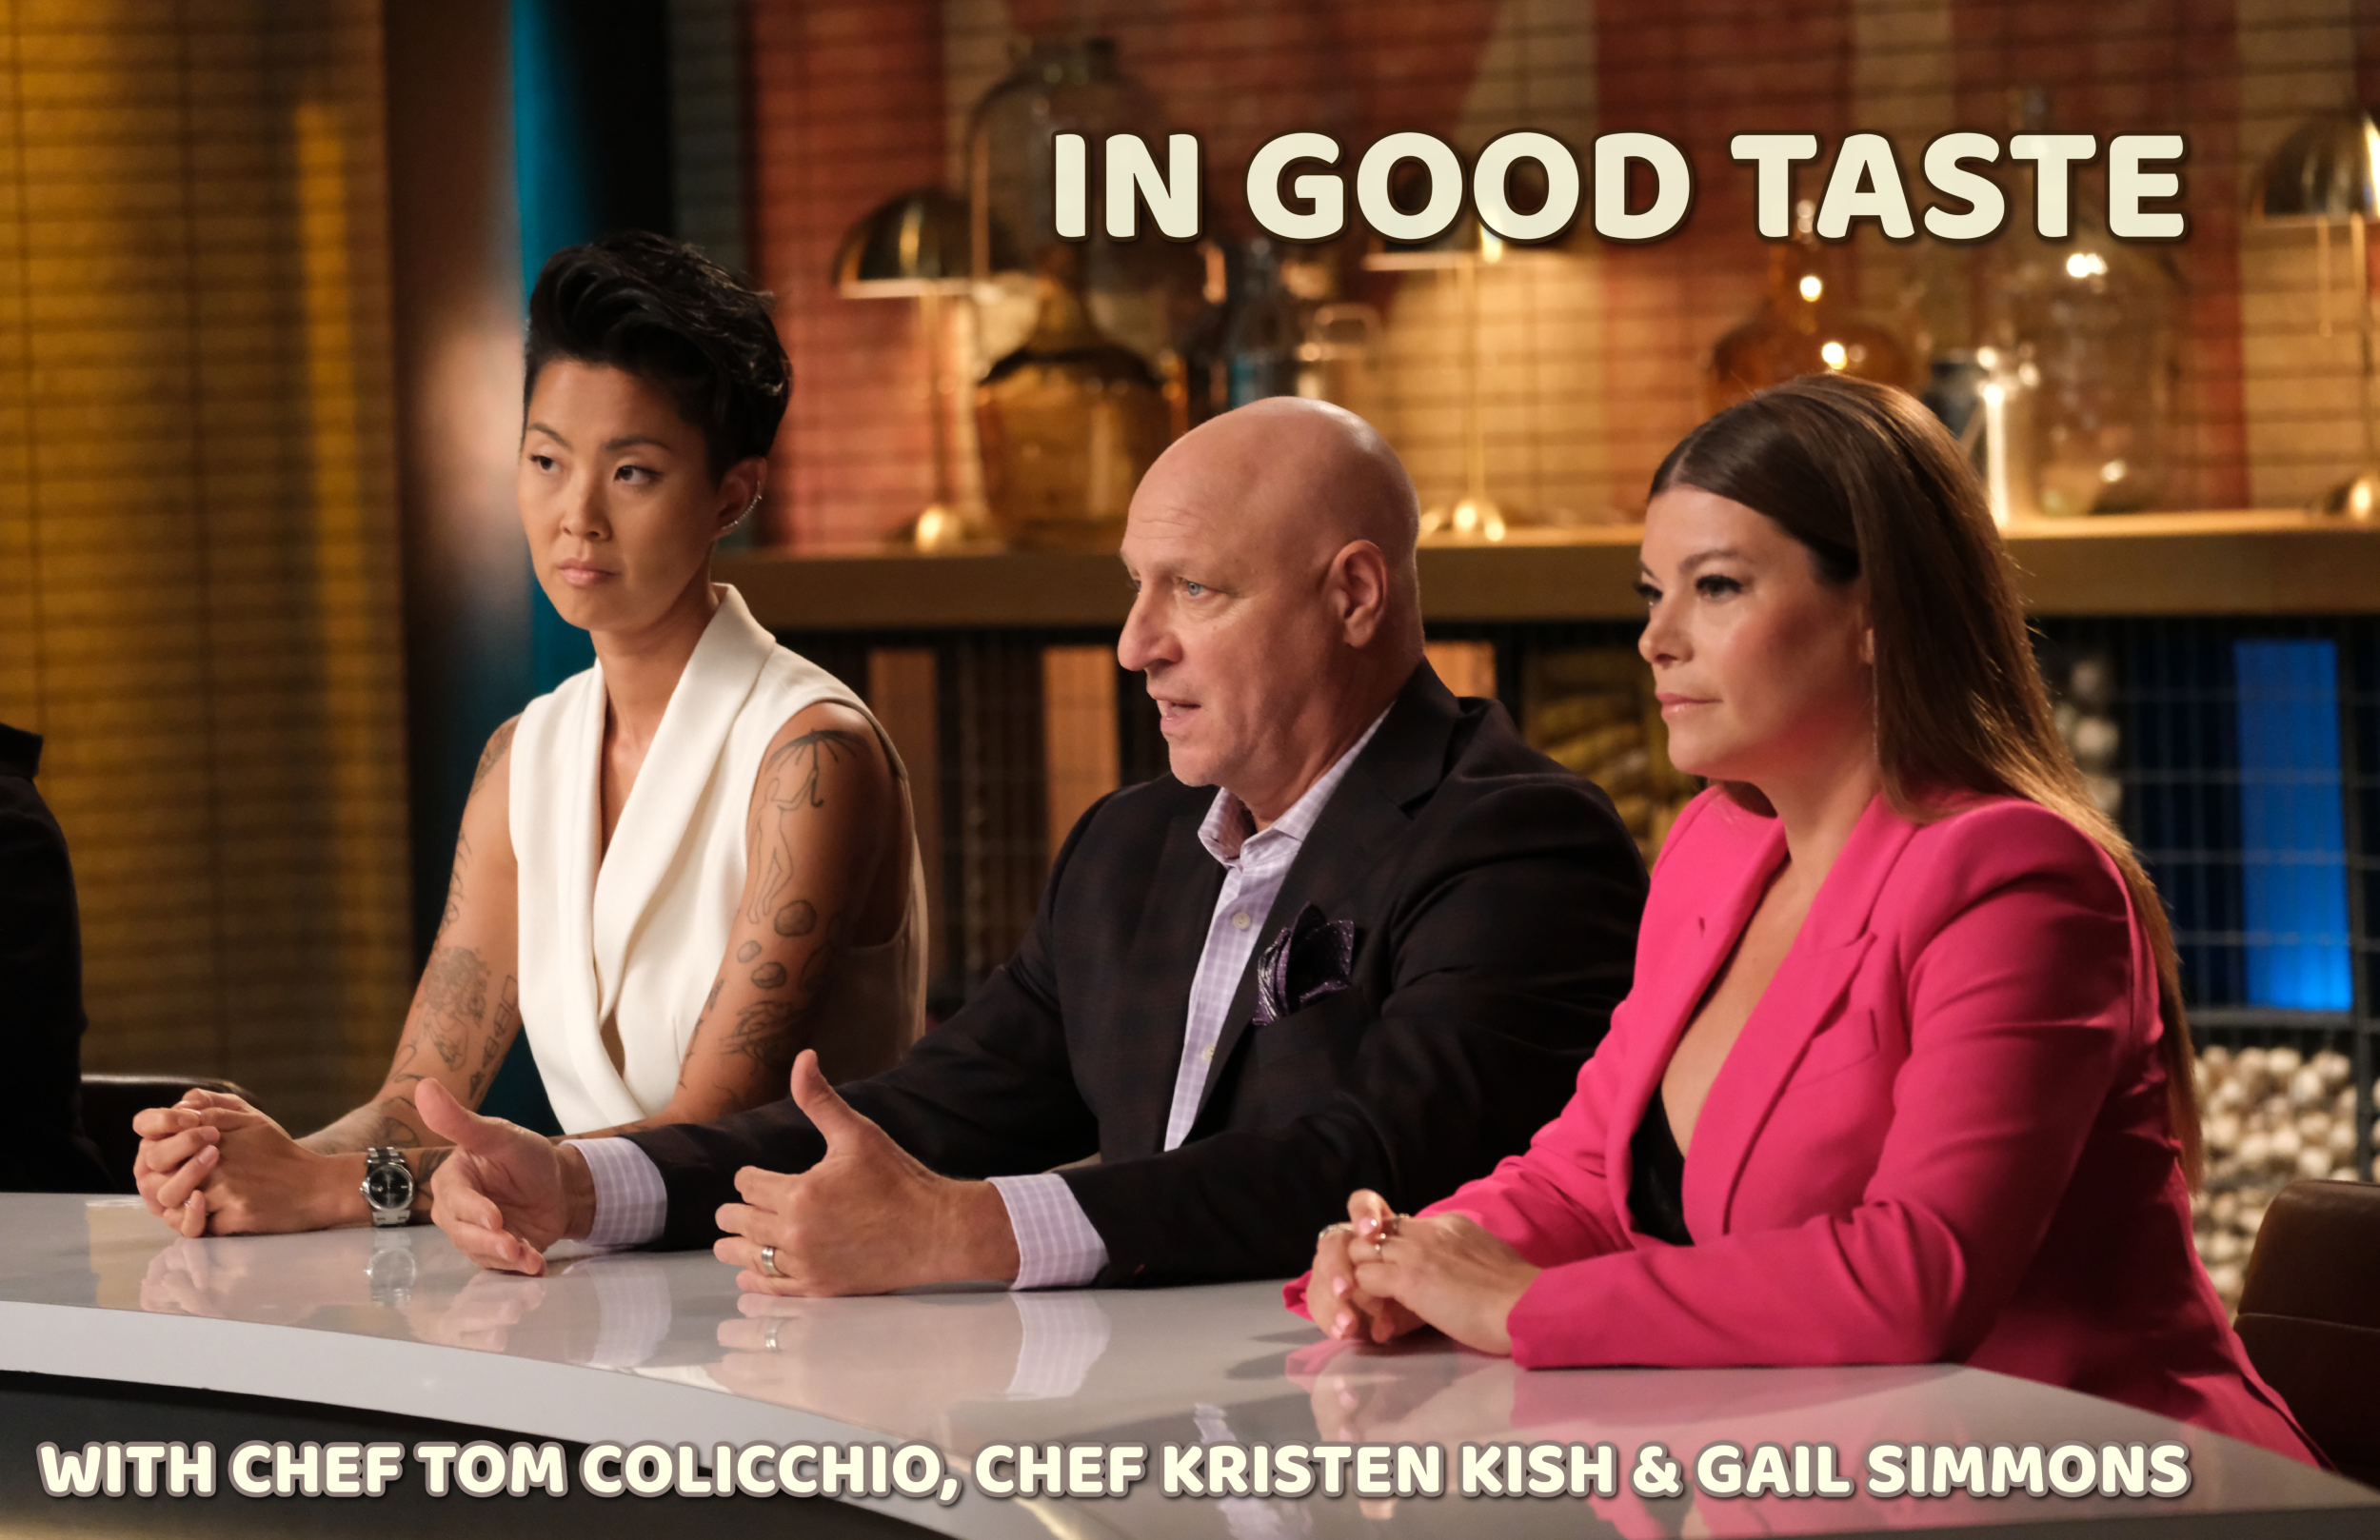 ATHLEISURE MAG #99 | BRAVO Top Chef's Chef Tom Colicchio, Chef Kristen Kish, and Gail Simmons